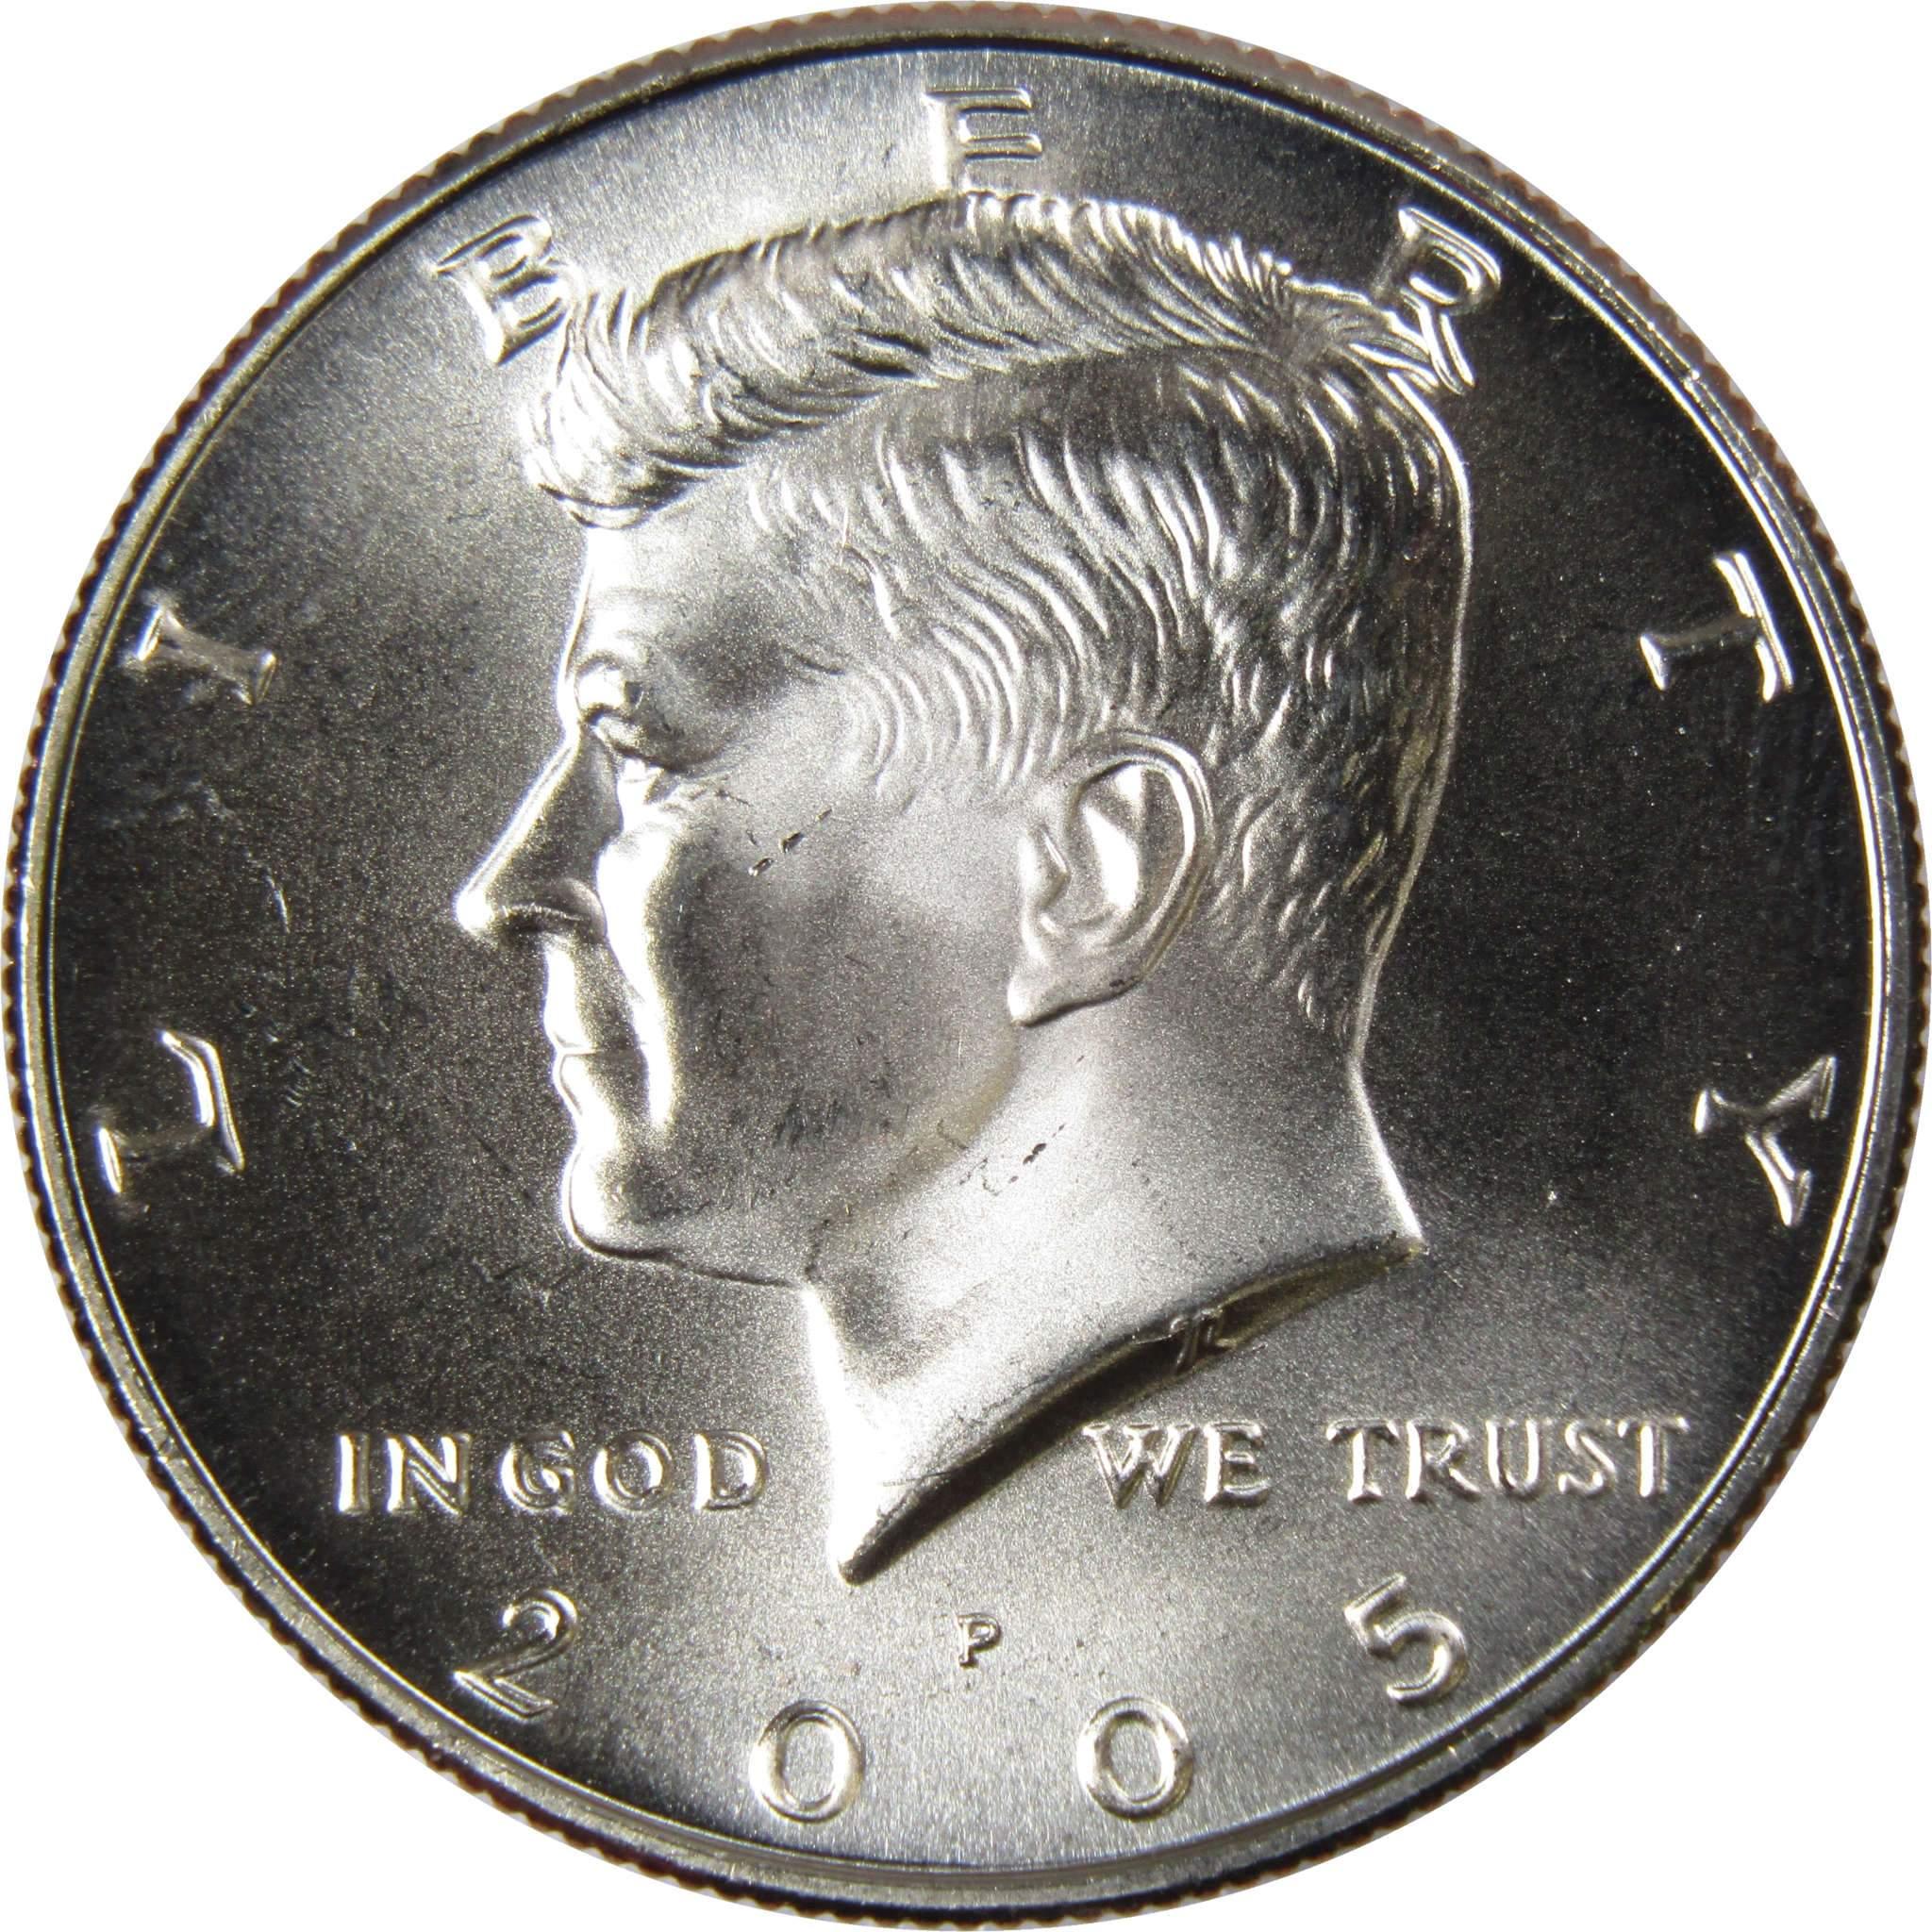 2005 P Kennedy Half Dollar BU Uncirculated Mint State 50c US Coin Collectible